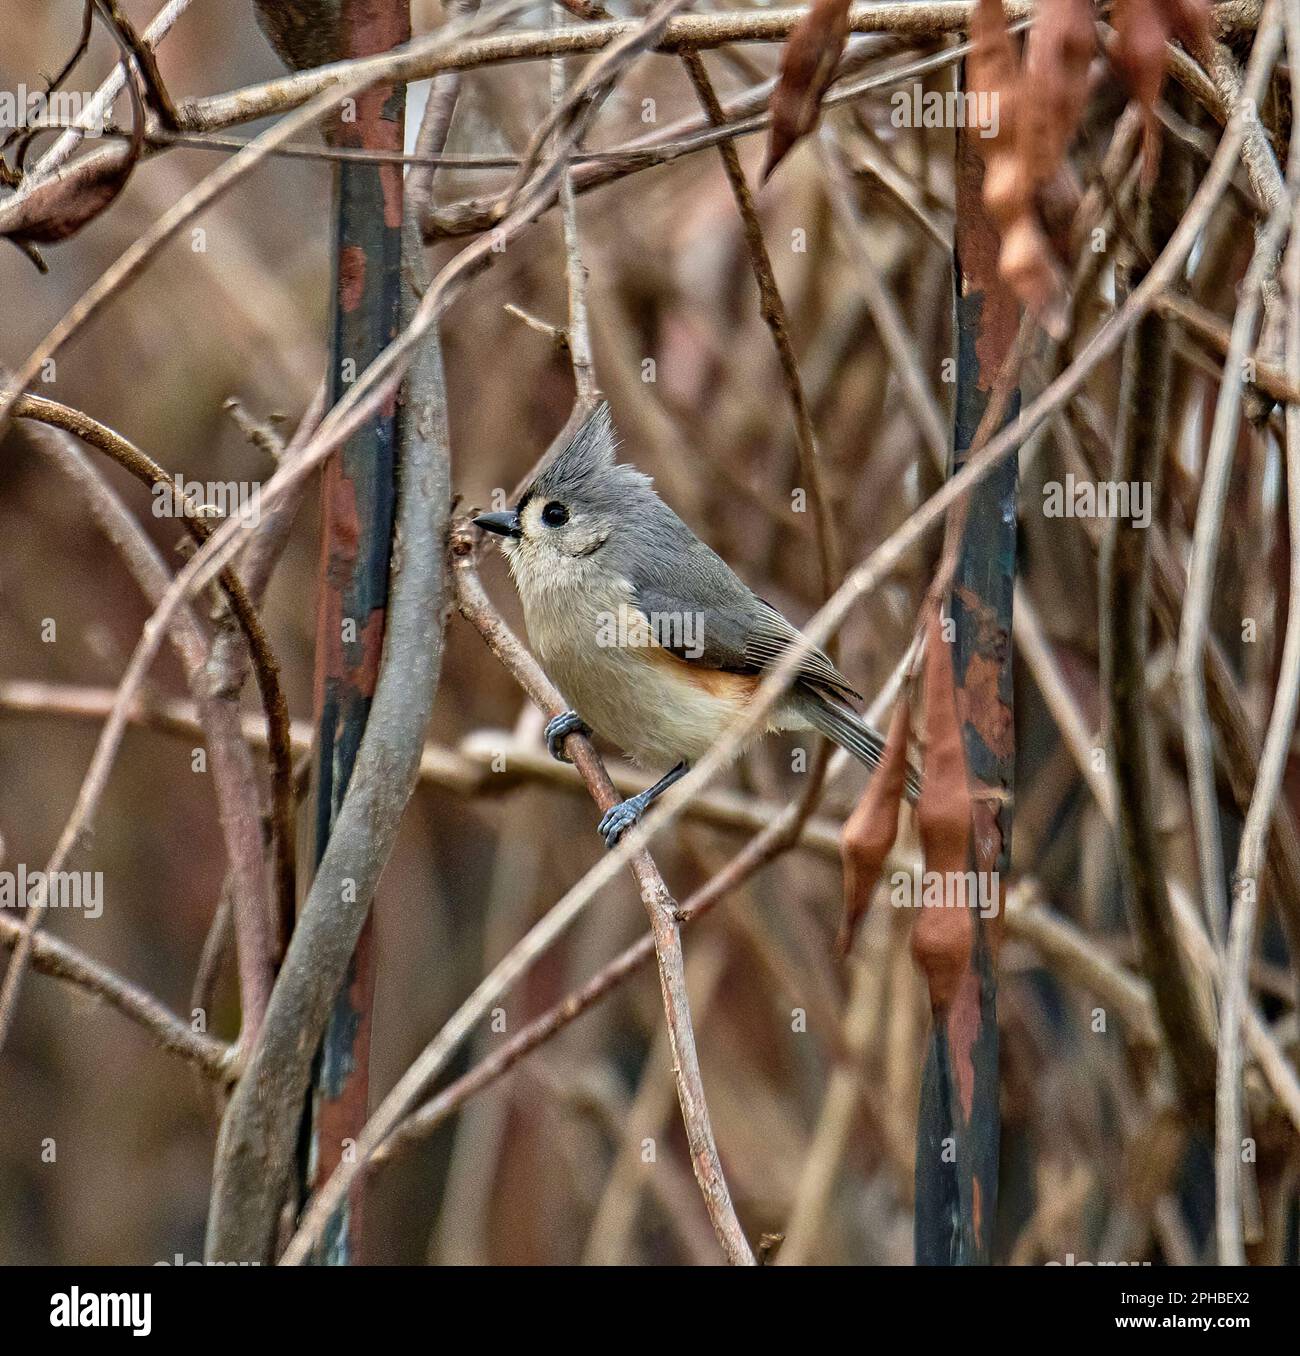 Tufted Titmouse is a small songbird from North America. These small birds have a white front and grey upper body outlined with rust colored flanks. Stock Photo